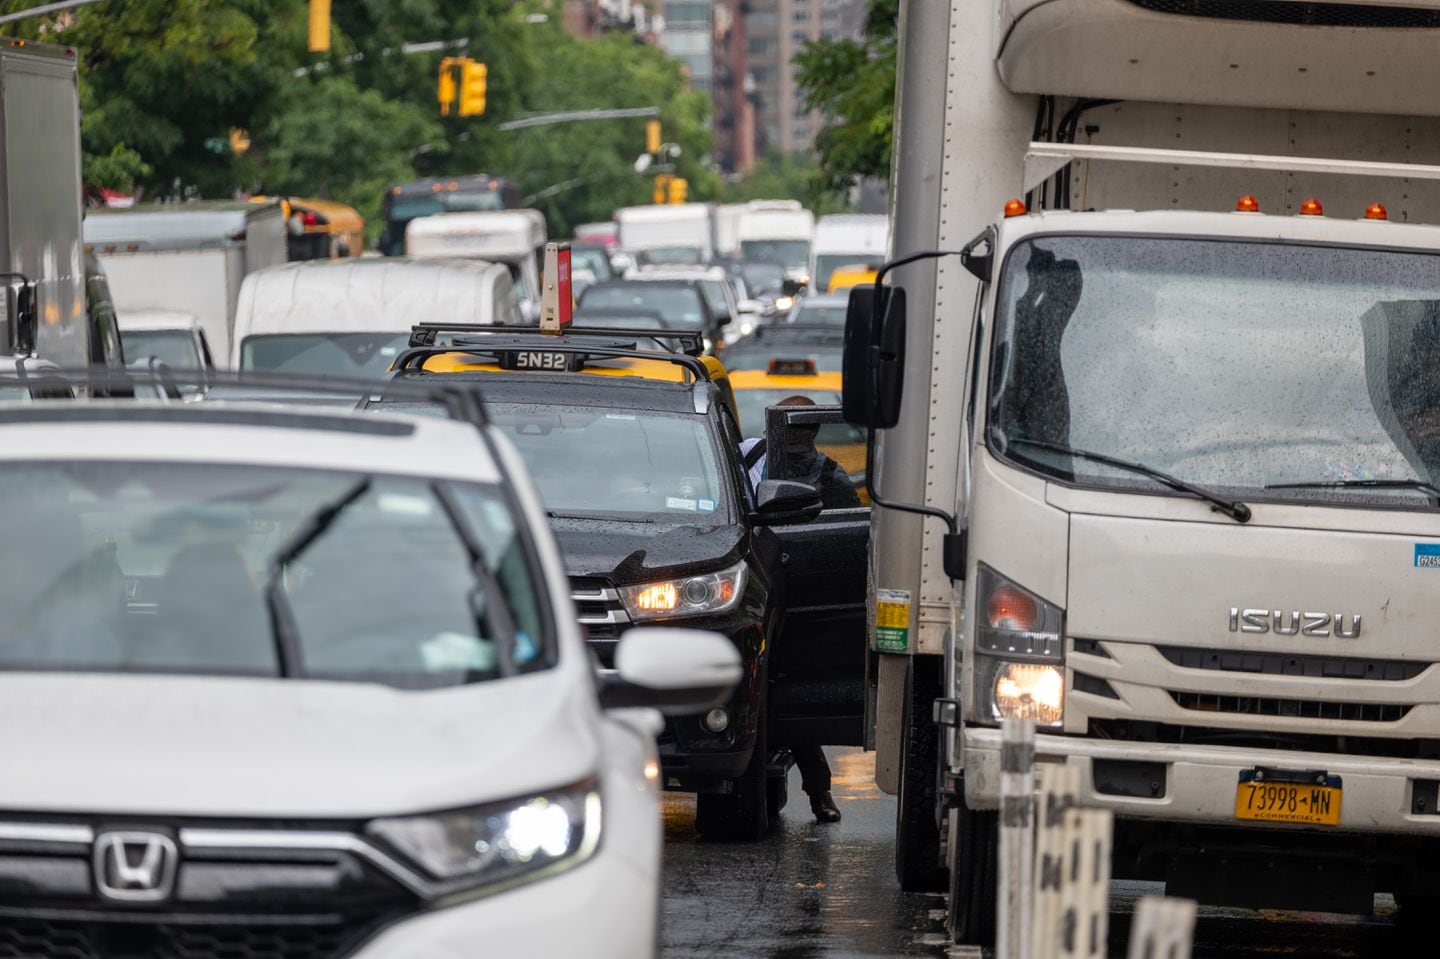 New York’s beloved traffic jams will live another day, thanks to a last-minute decision by Governor Kathy Hochul to indefinitely pause the city’s congestion pricing system. Set to start in a few weeks, the system was going to be used to help pay for major repairs to the city’s subway system. The governor said that the price, which would have been over $16 for cars, would place a financial burden on New Yorkers and local businesses at a time when the city hasn’t fully recovered from the pandemic.